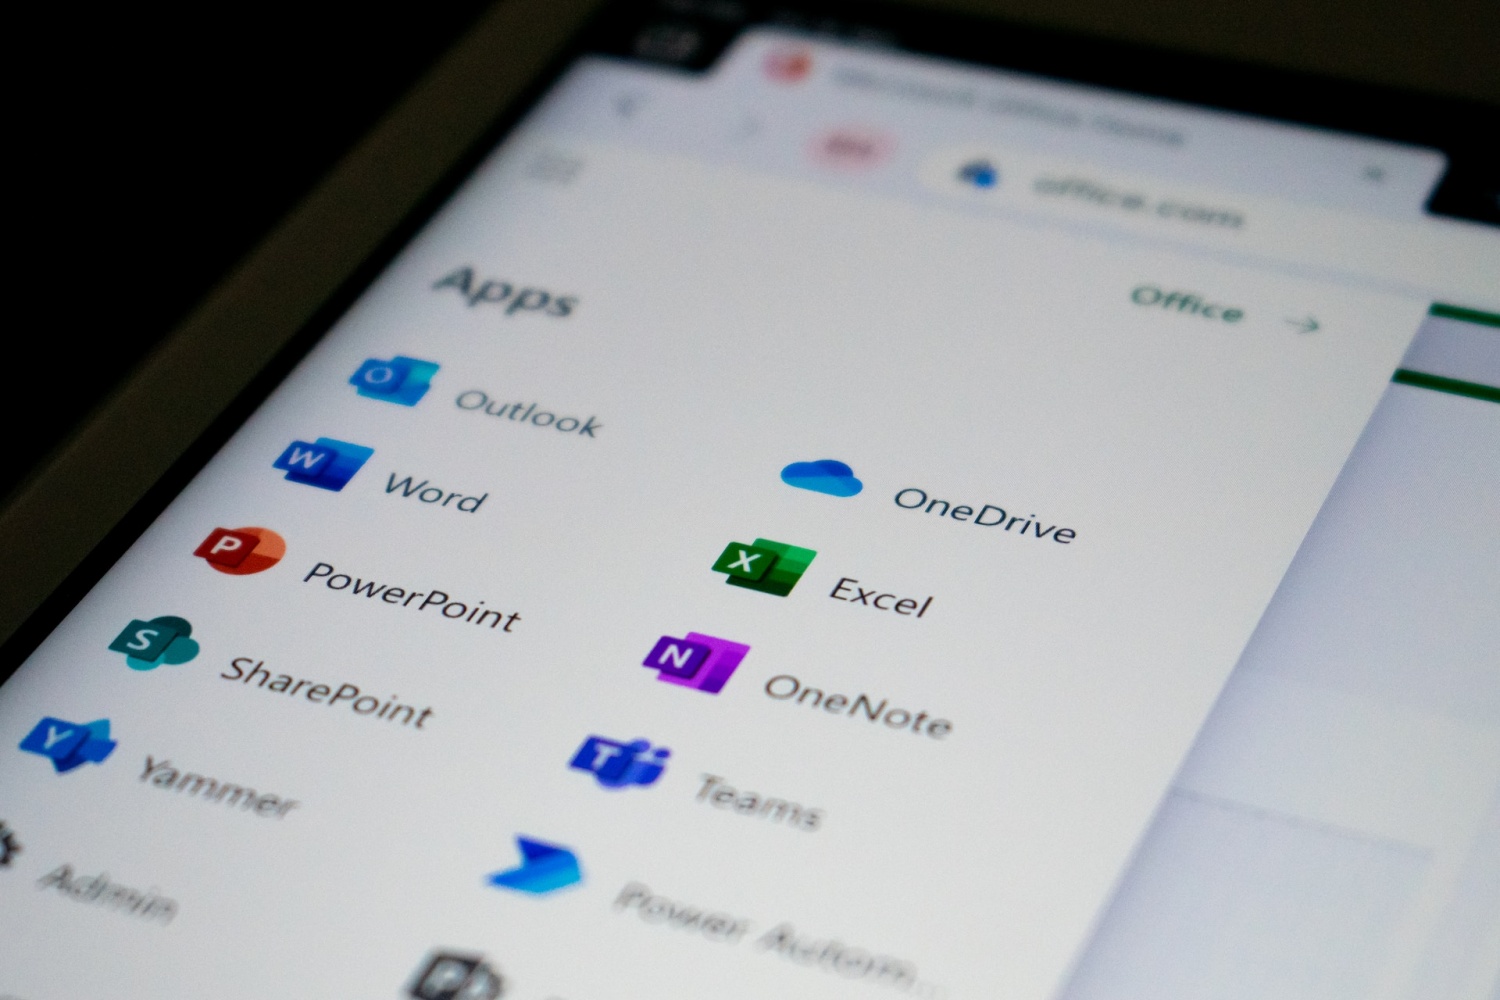 Microsoft Rolls Out New Changes in OneDrive Service: Copilot, Meetings View, and More